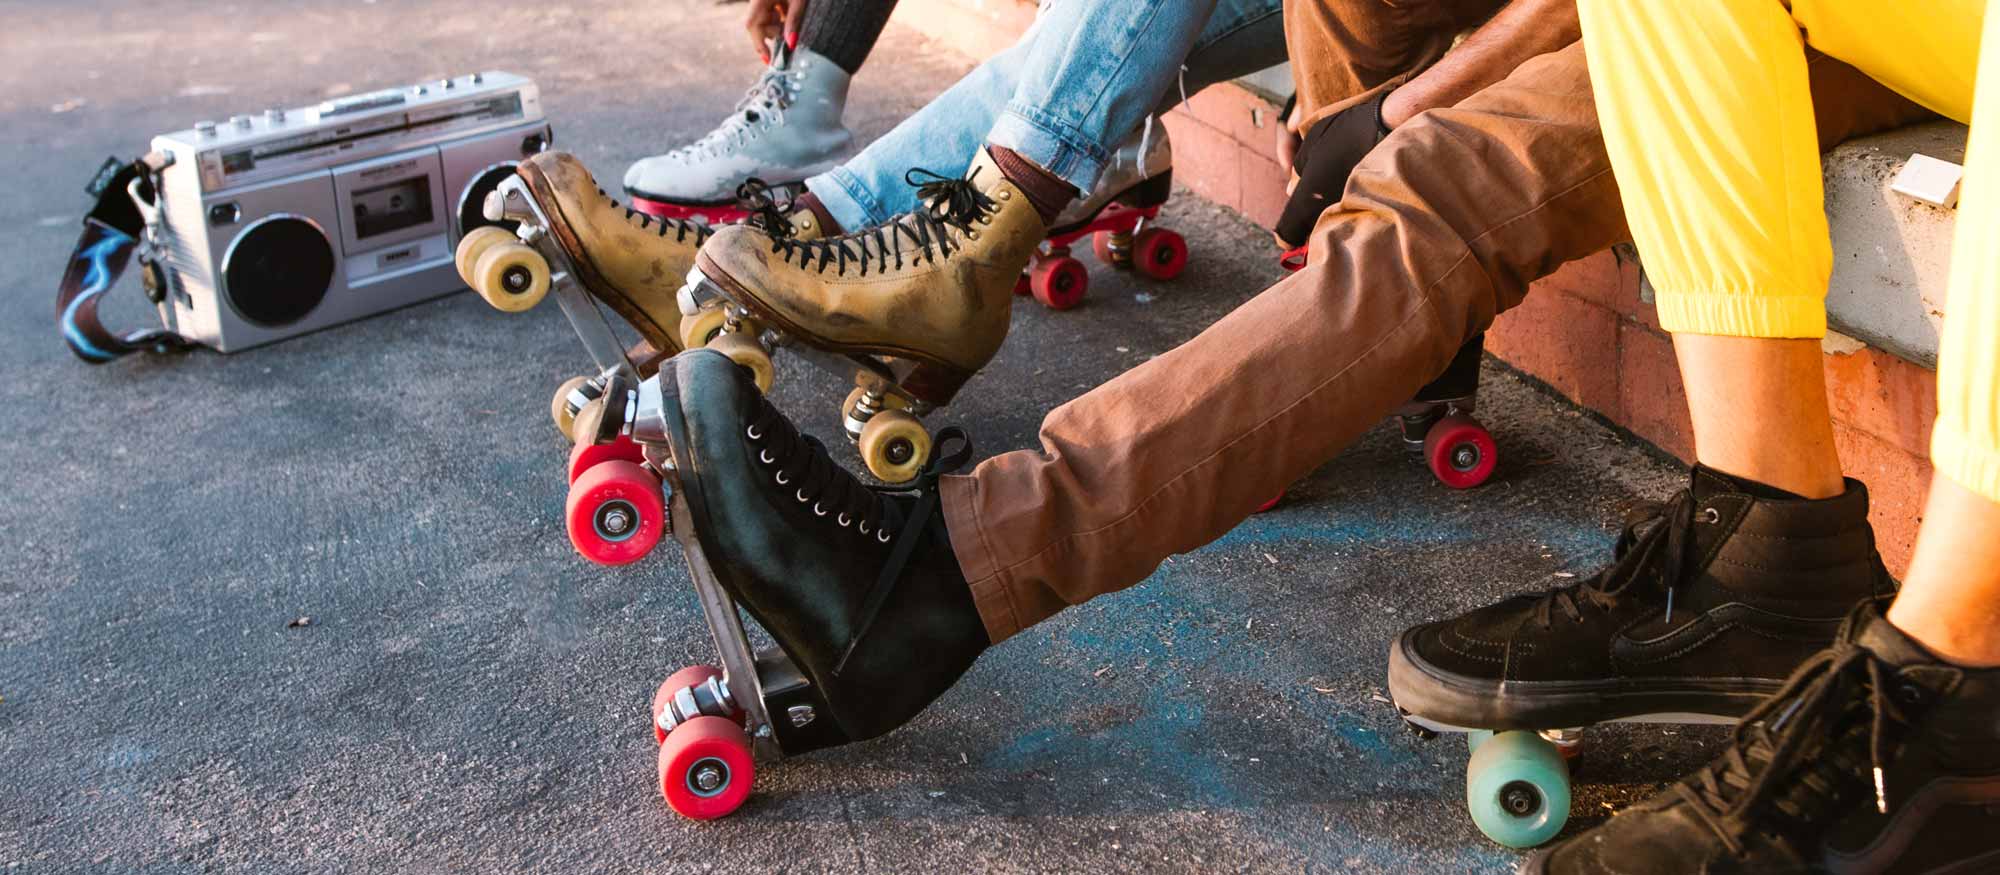 Group of people wearing roller-blades